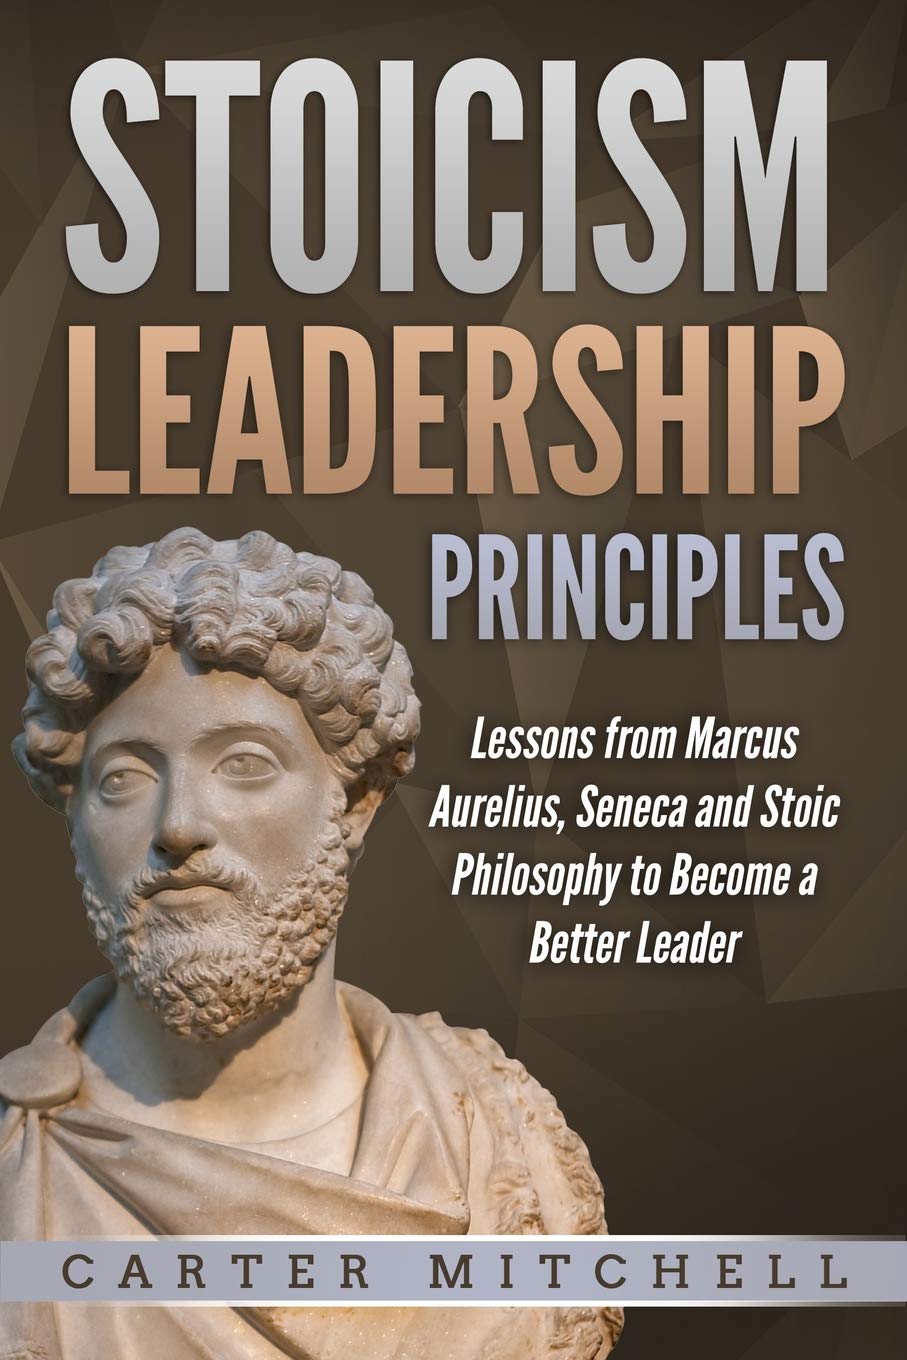 Stoicism Leadership Principles: Lessons from Marcus Aurelius, Seneca and  Stoic Philosophy to Become a Better Leader: Mitchell, Carter:  9781670738936: Amazon.com: Books